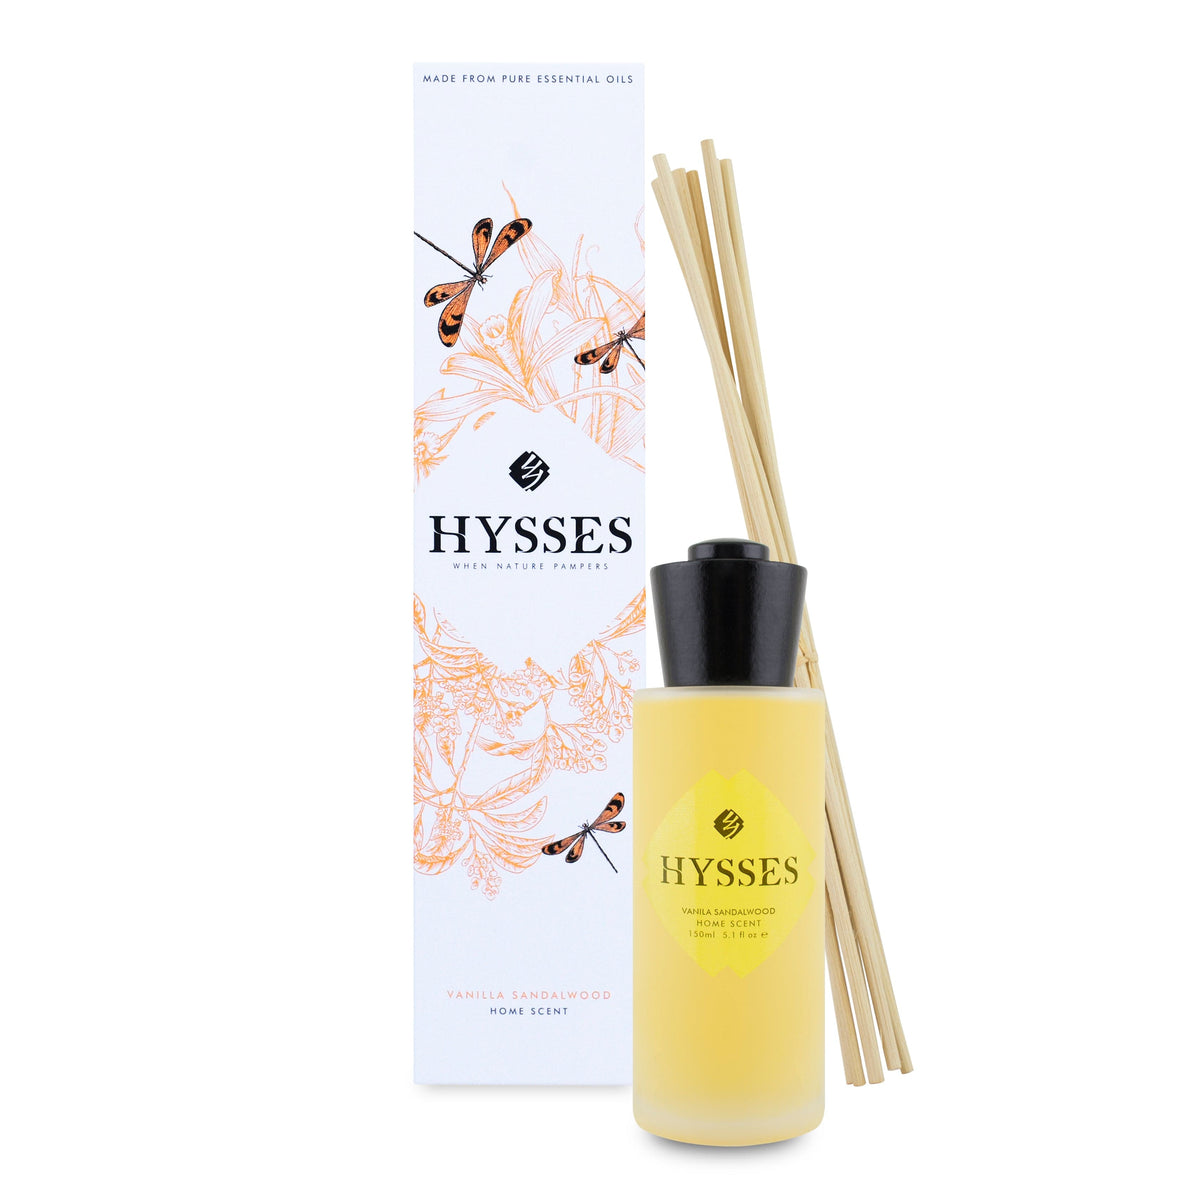 Hysses Home Scents 150ml Home Scent Reed Diffuser Vanilla Sandalwood